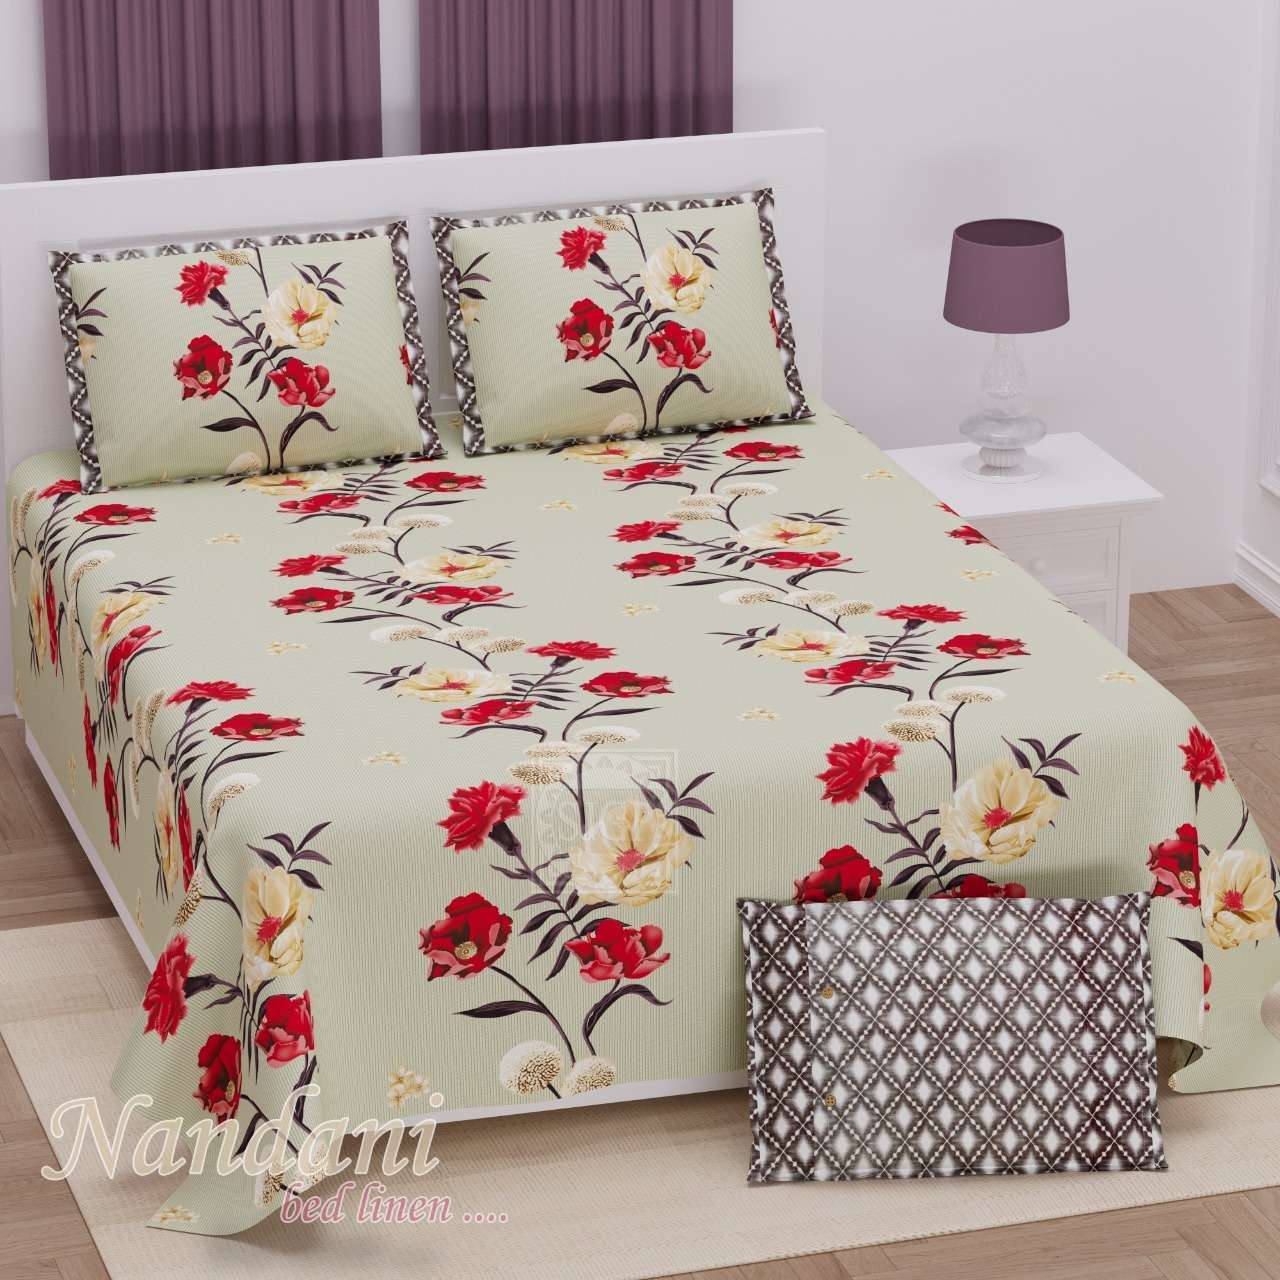 nandini king size 1 bedsheets with 2 pillow cover twill satin floral prints